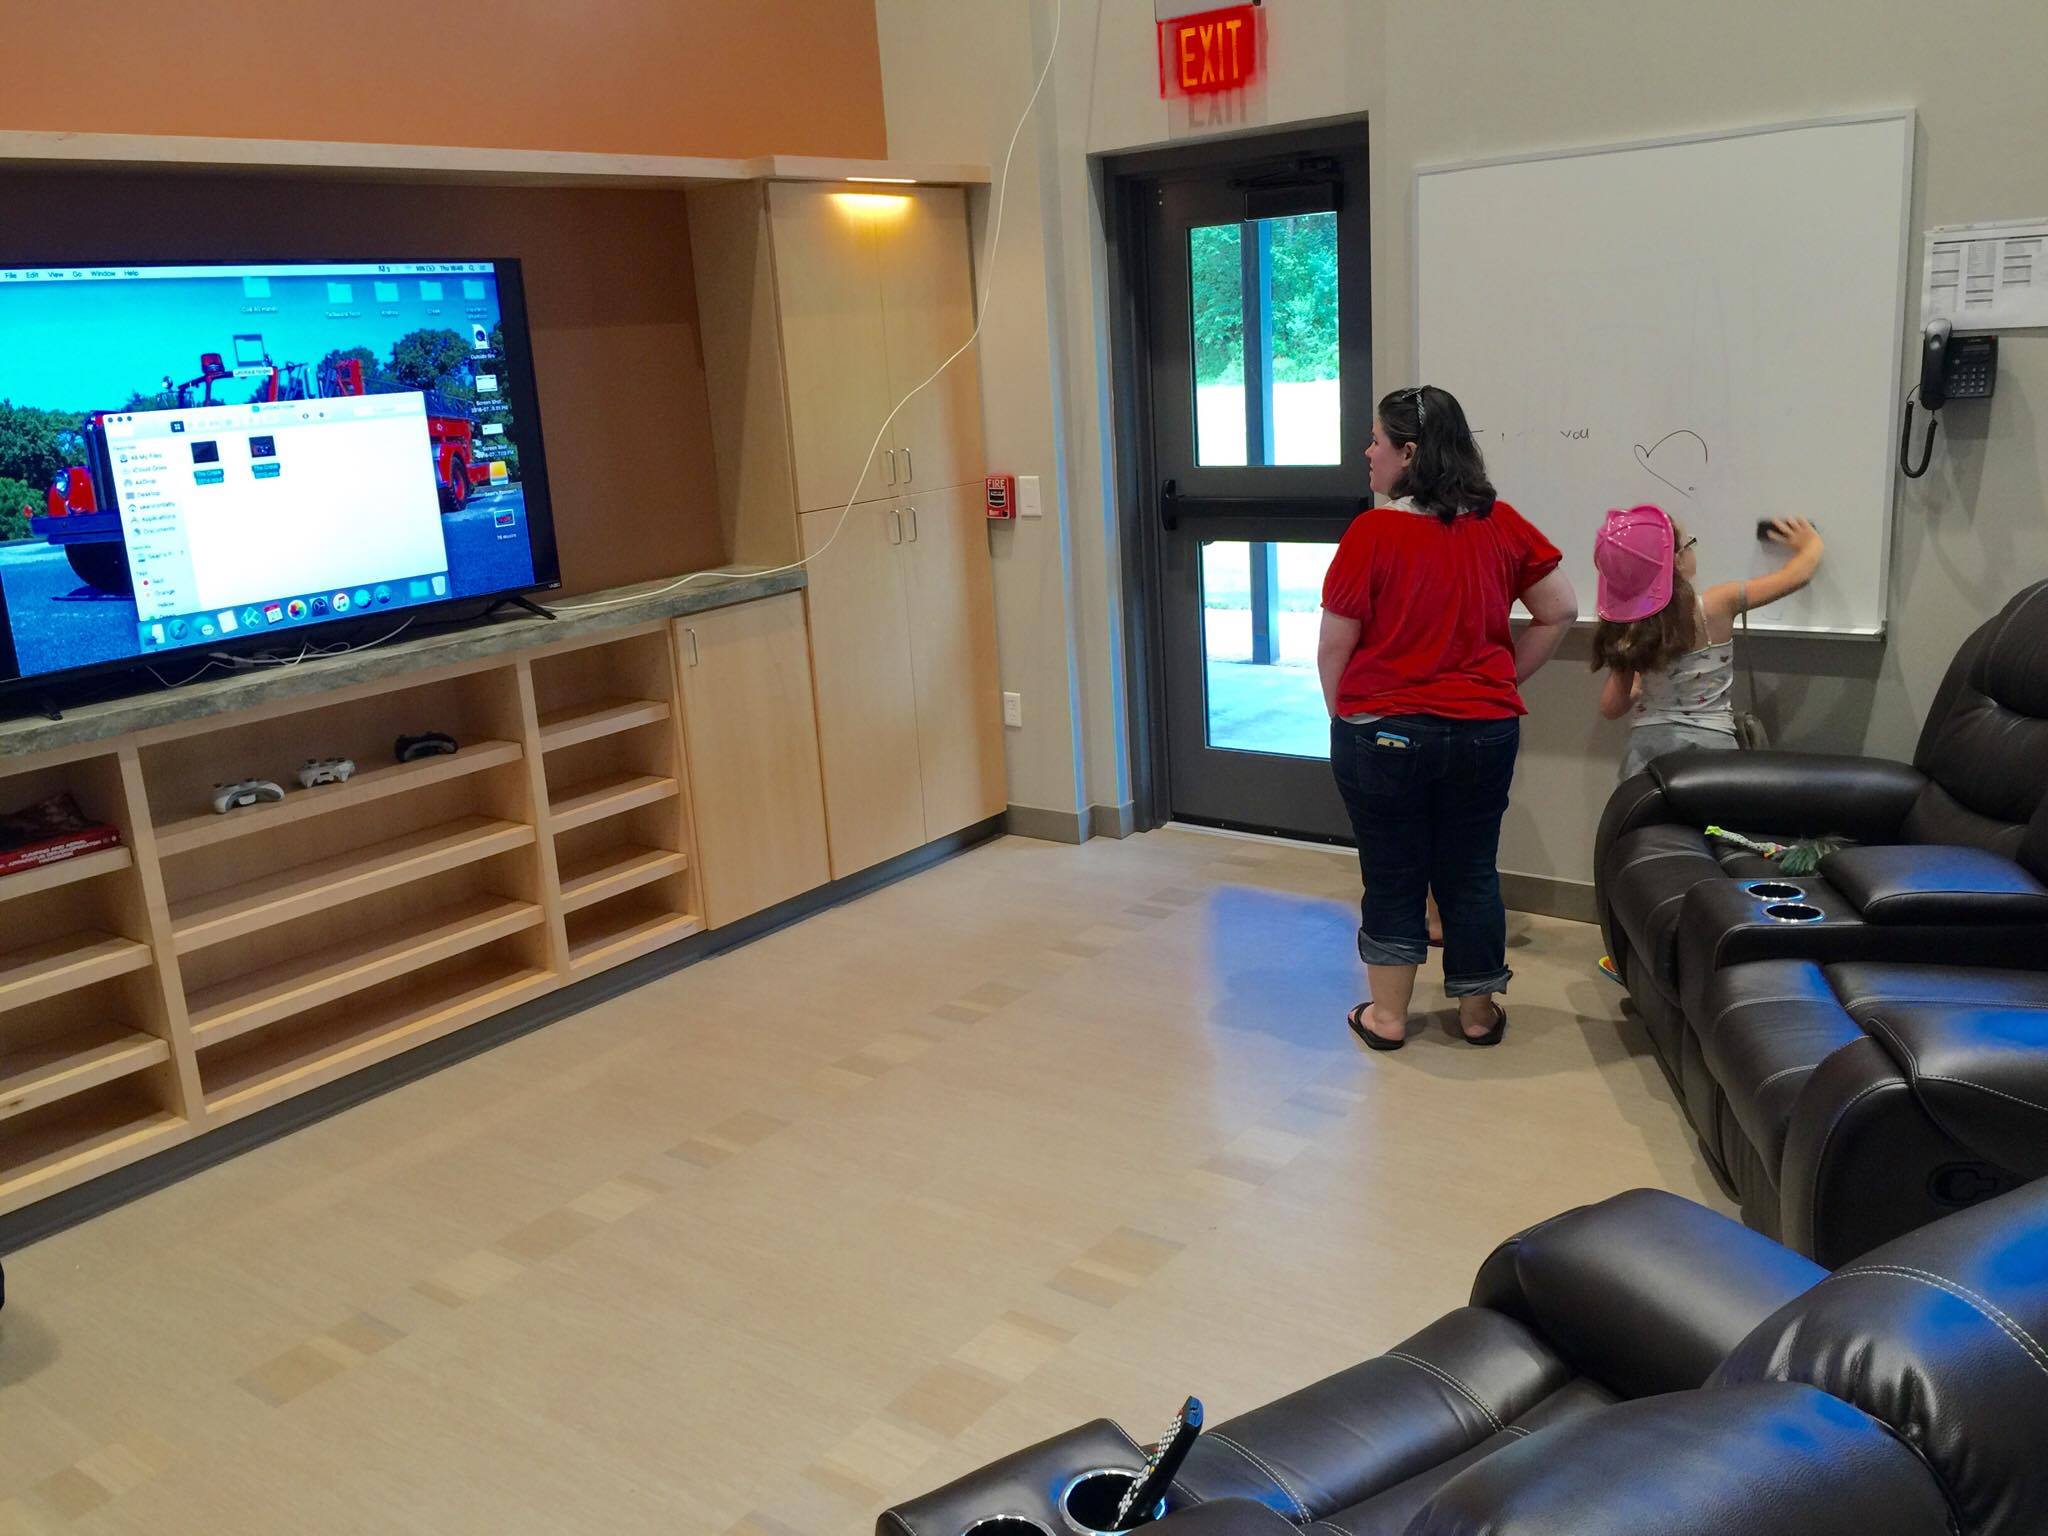 The lounge/TV room at the new station.